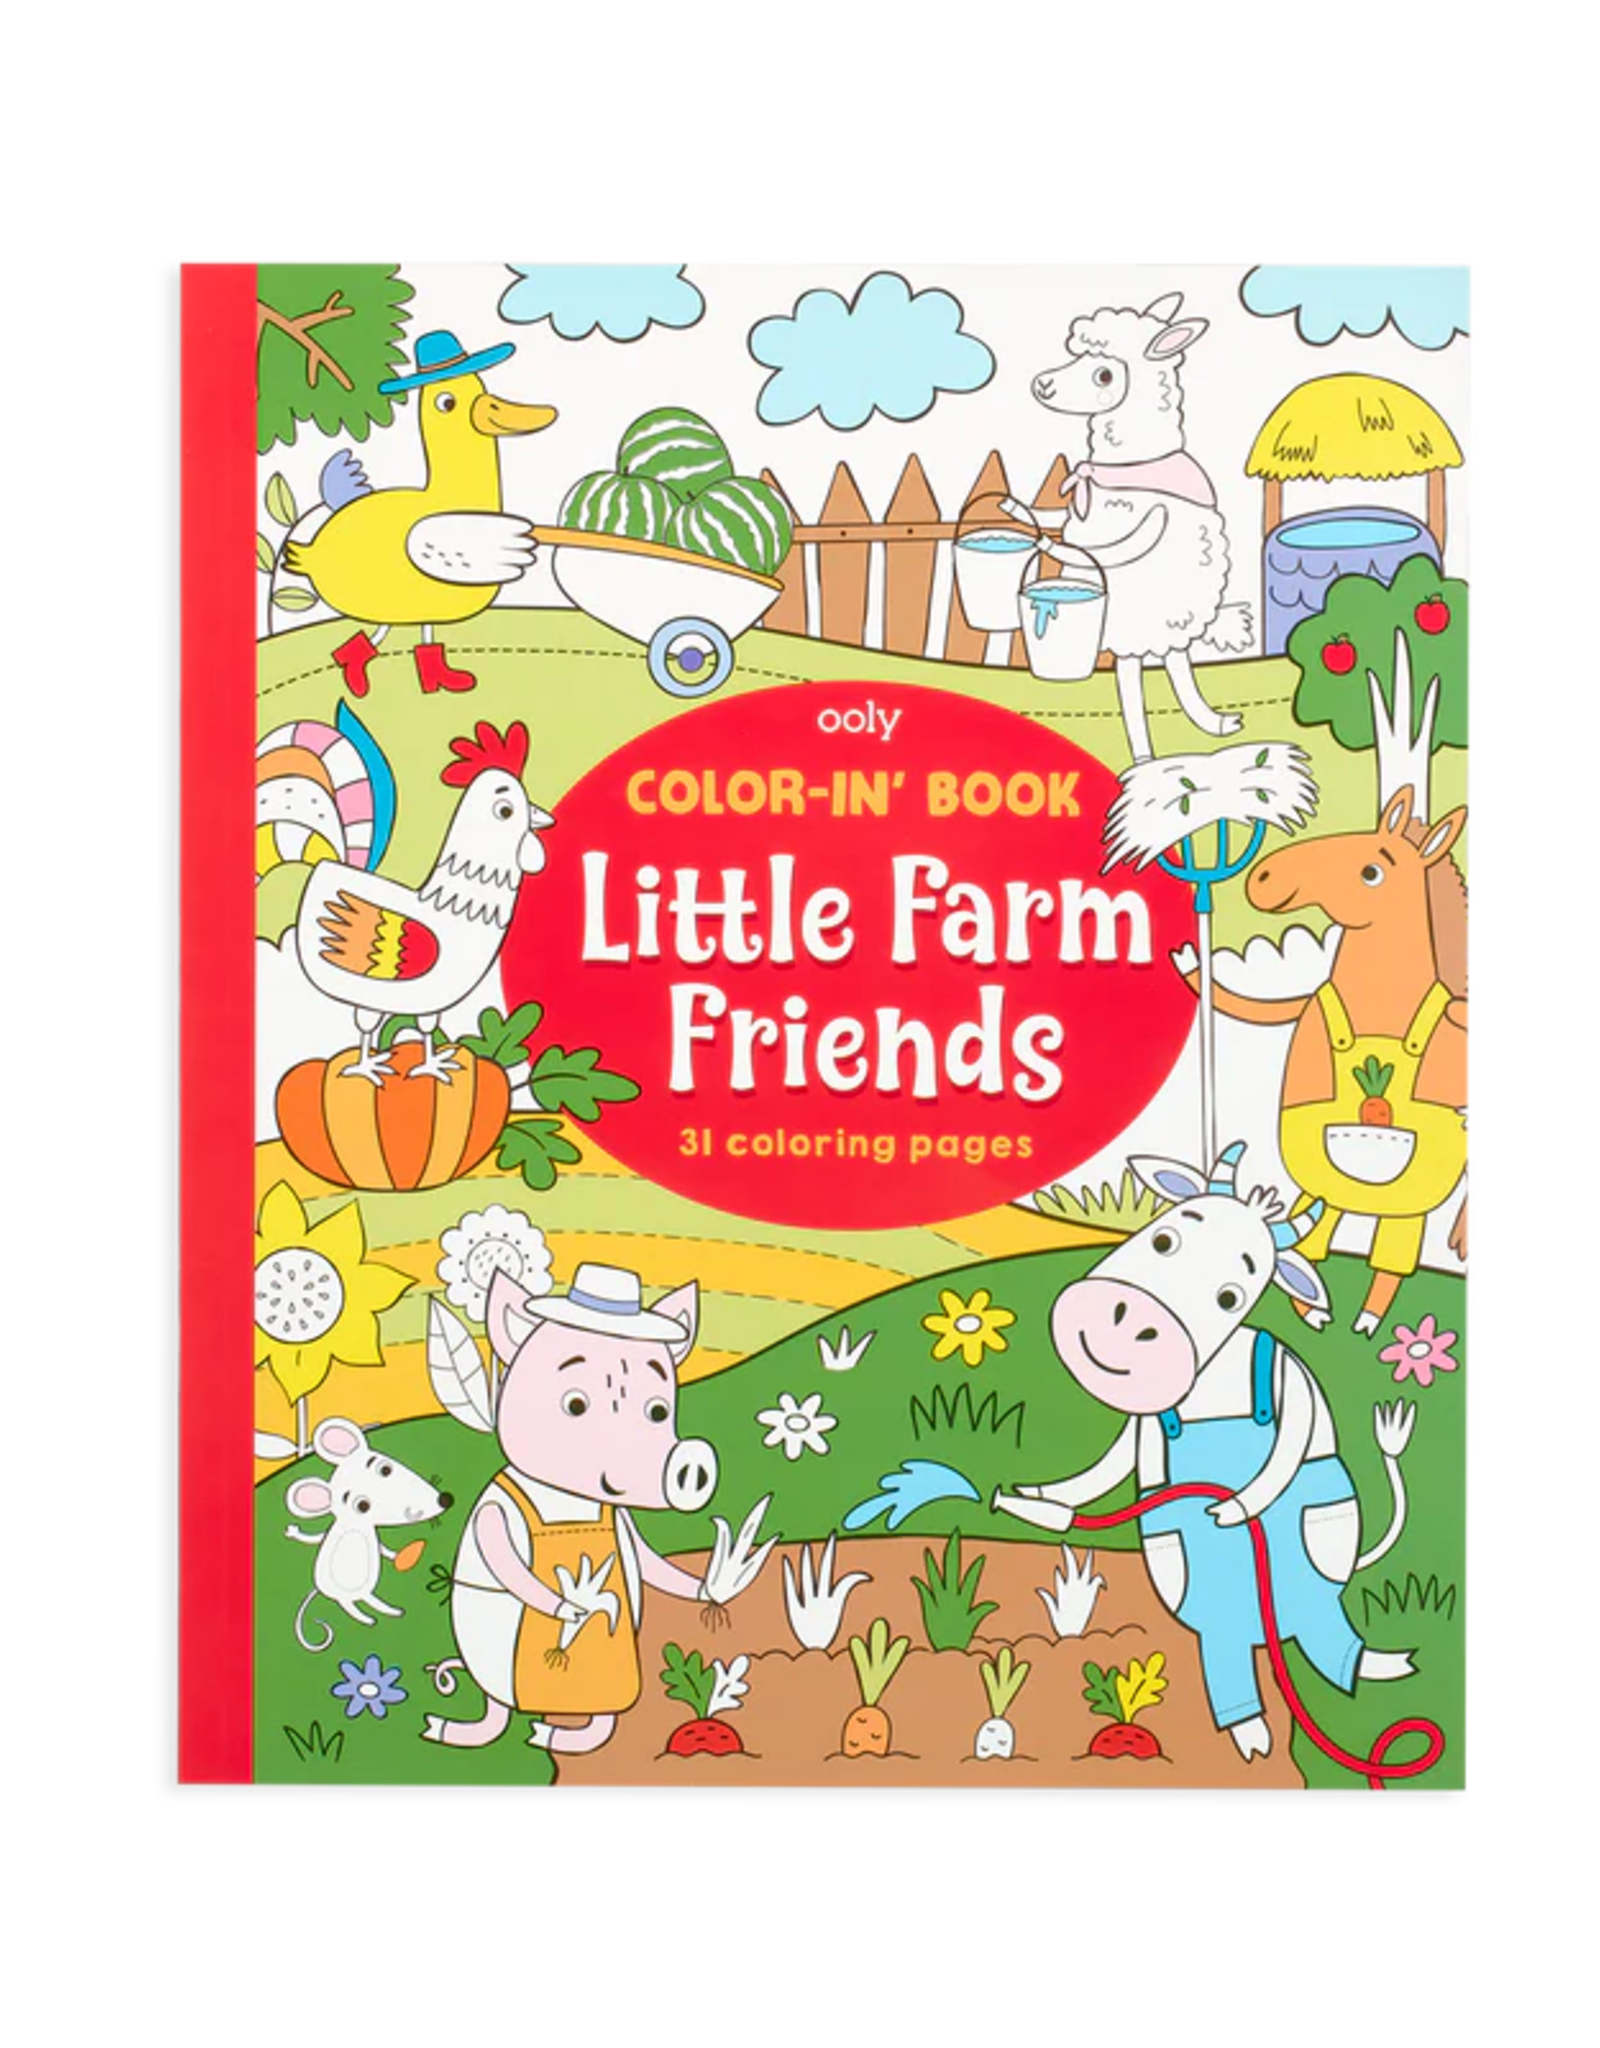 Ooly Color'In Book Little Farm Friends